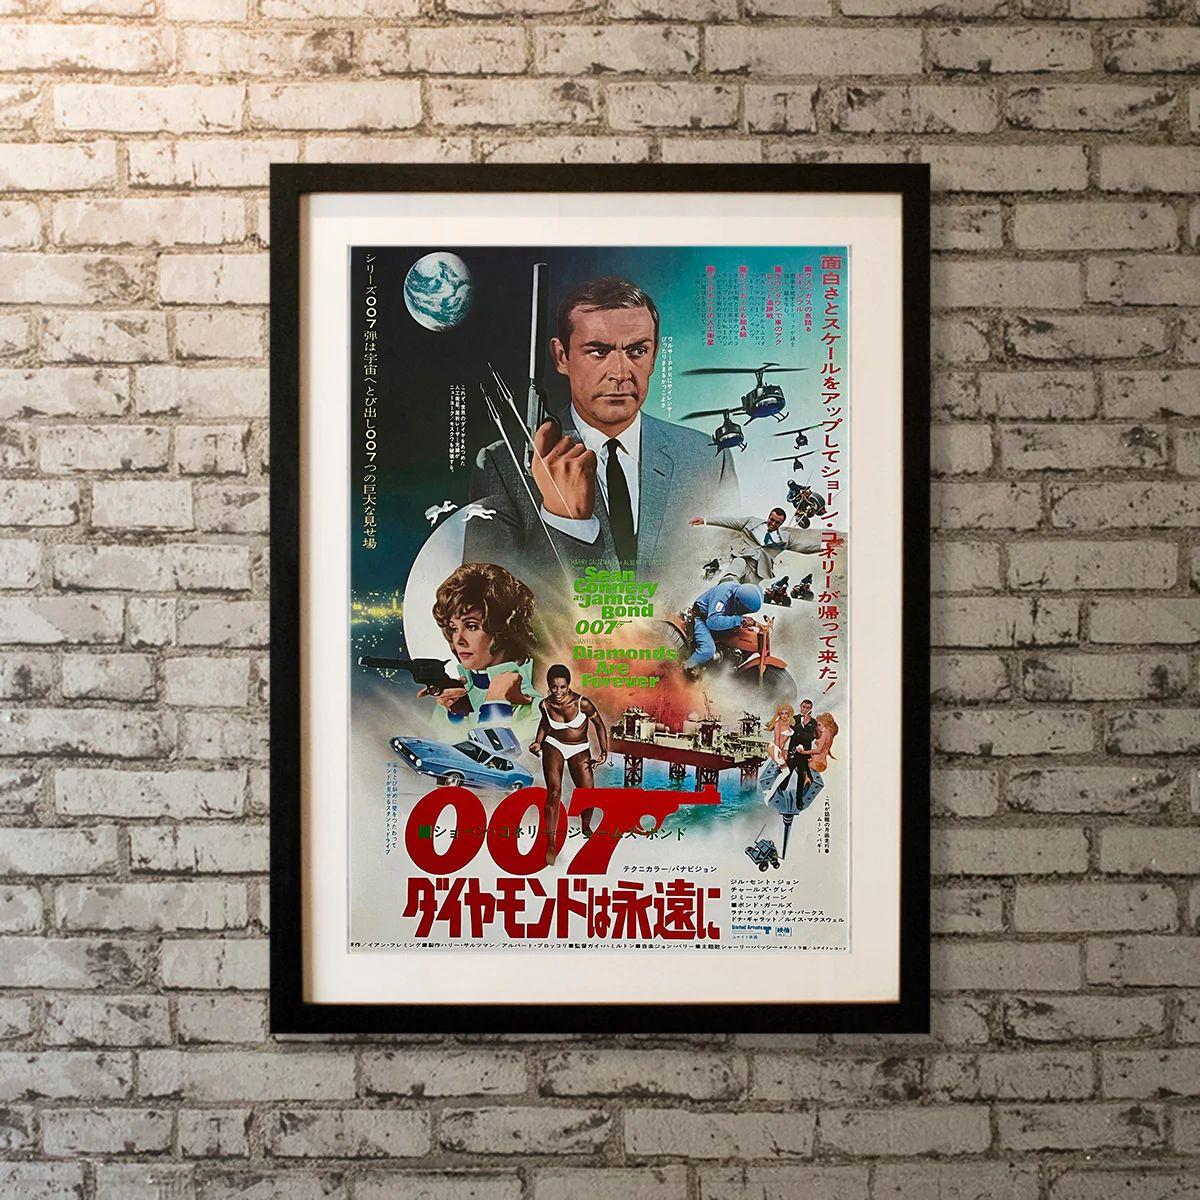 Diamonds Are Forever, Unframed Poster, 1971

Japanese B2 (20 X 29 Inches). A diamond smuggling investigation leads James Bond to Las Vegas, where he uncovers an evil plot involving a rich business tycoon.

Year: 1971
Nationality: